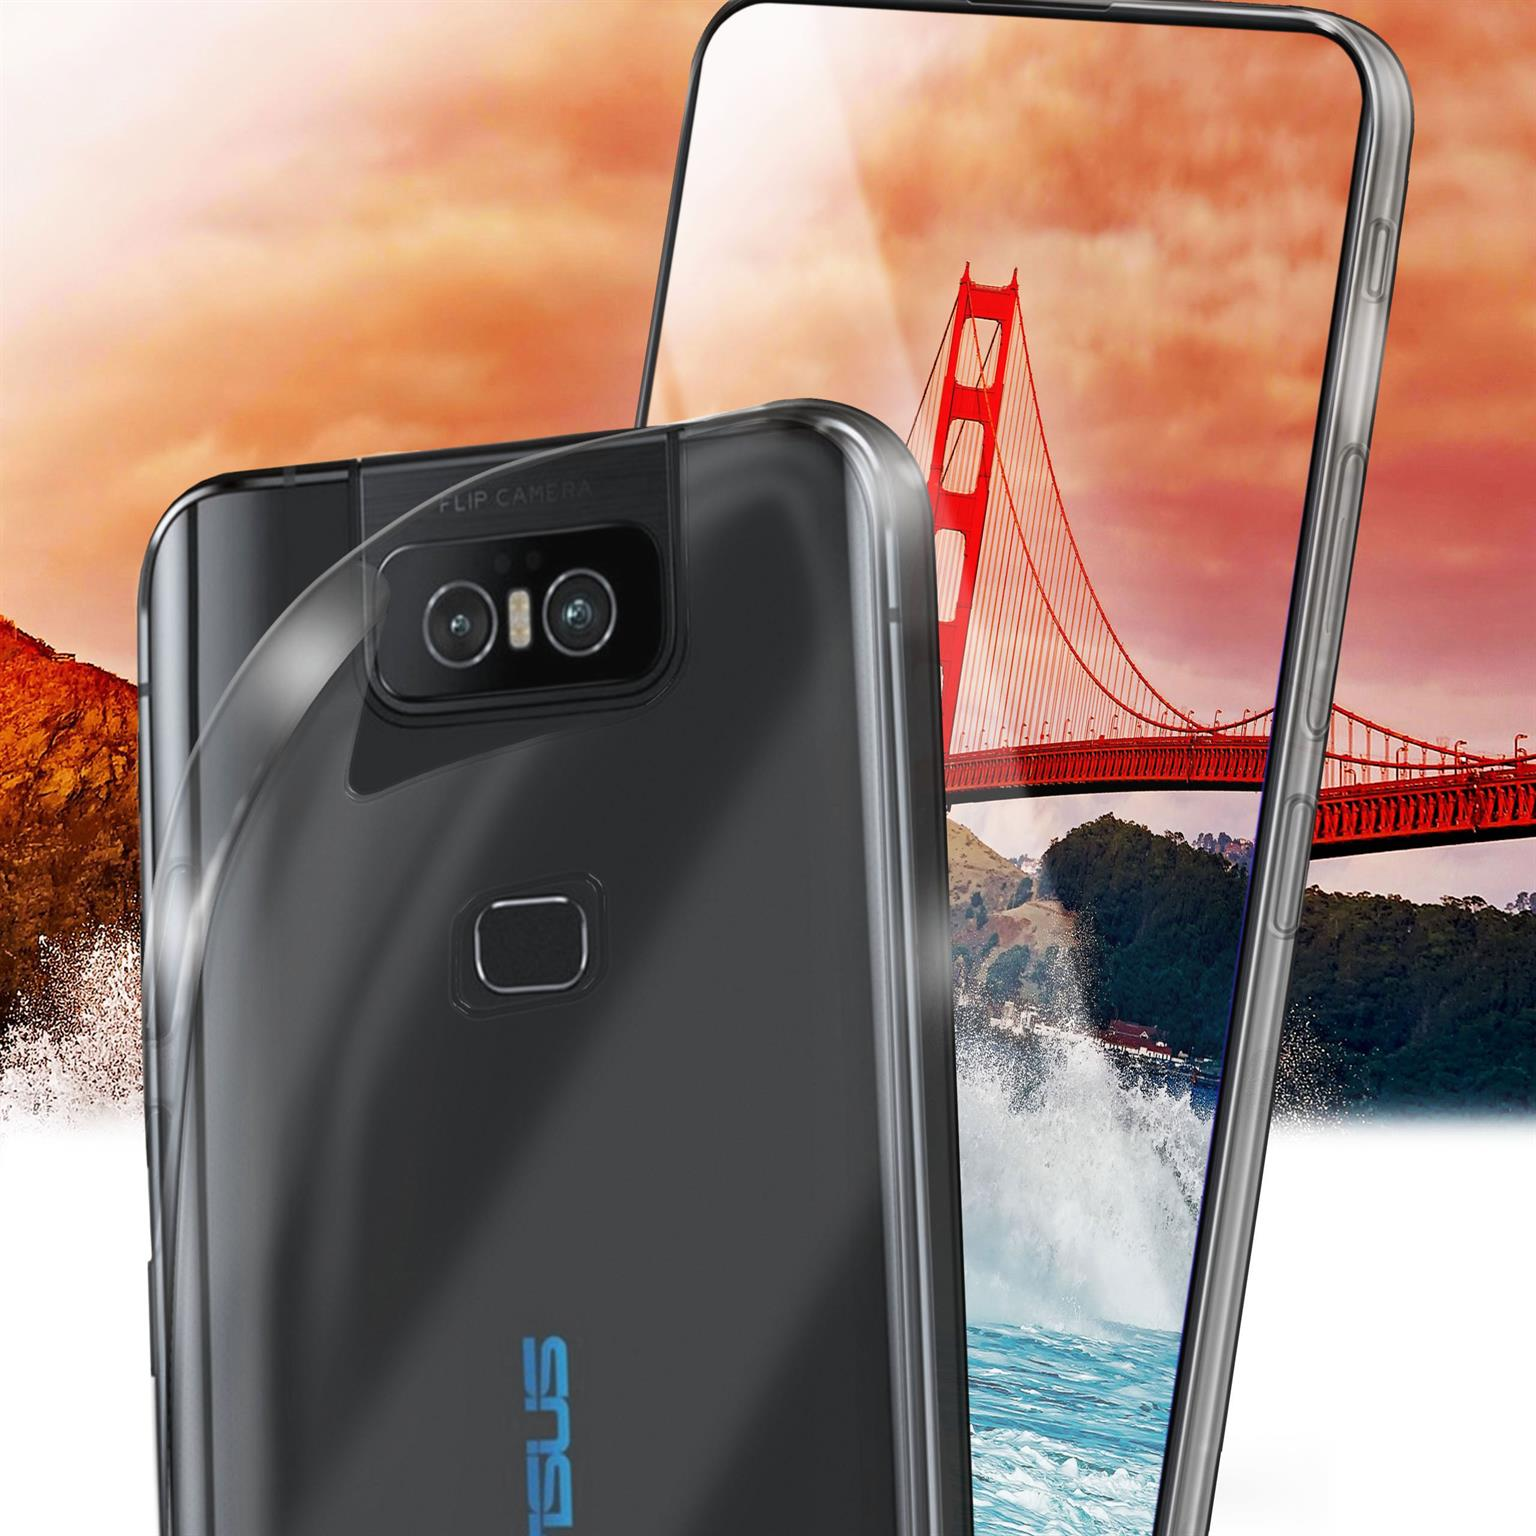 MOEX Aero Case, Backcover, ASUS, 6 Zenfone Crystal-Clear Asus (2019)